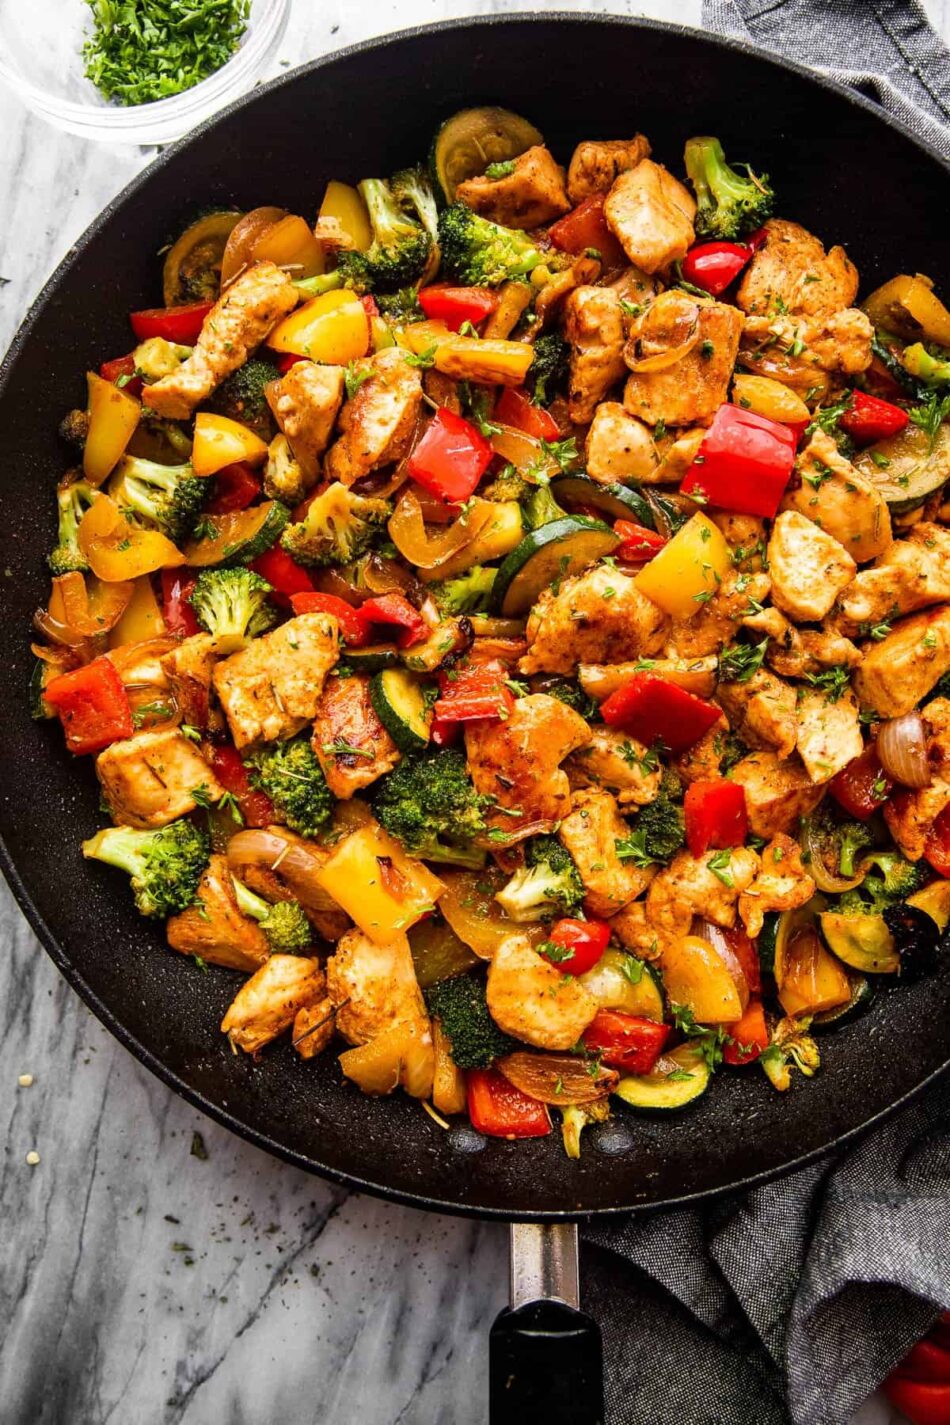 One-Pot Chicken and Vegetables Skillet – A Tasty Low Carb Dinner!